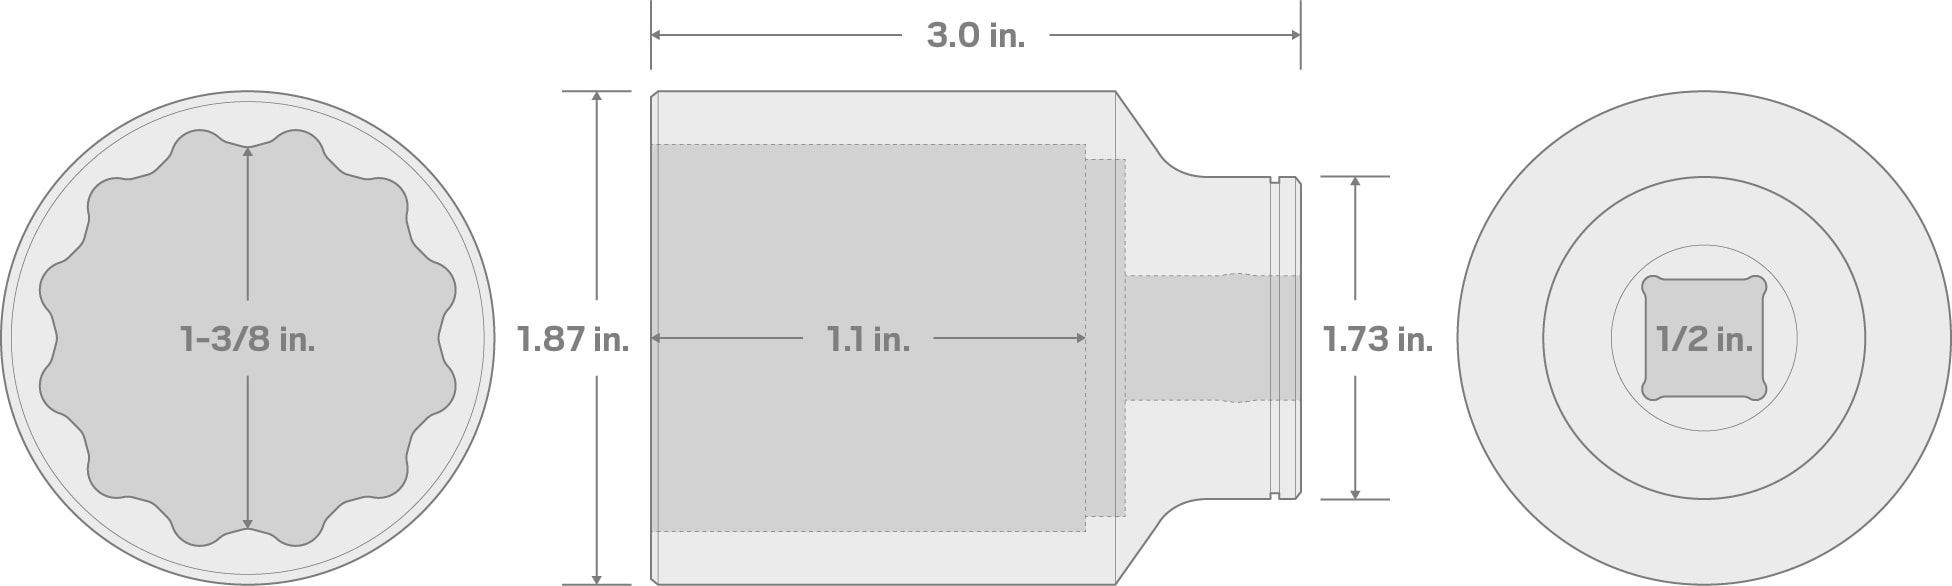 Specs for 1/2 Inch Drive x 1-3/8 Inch Deep 12-Point Socket